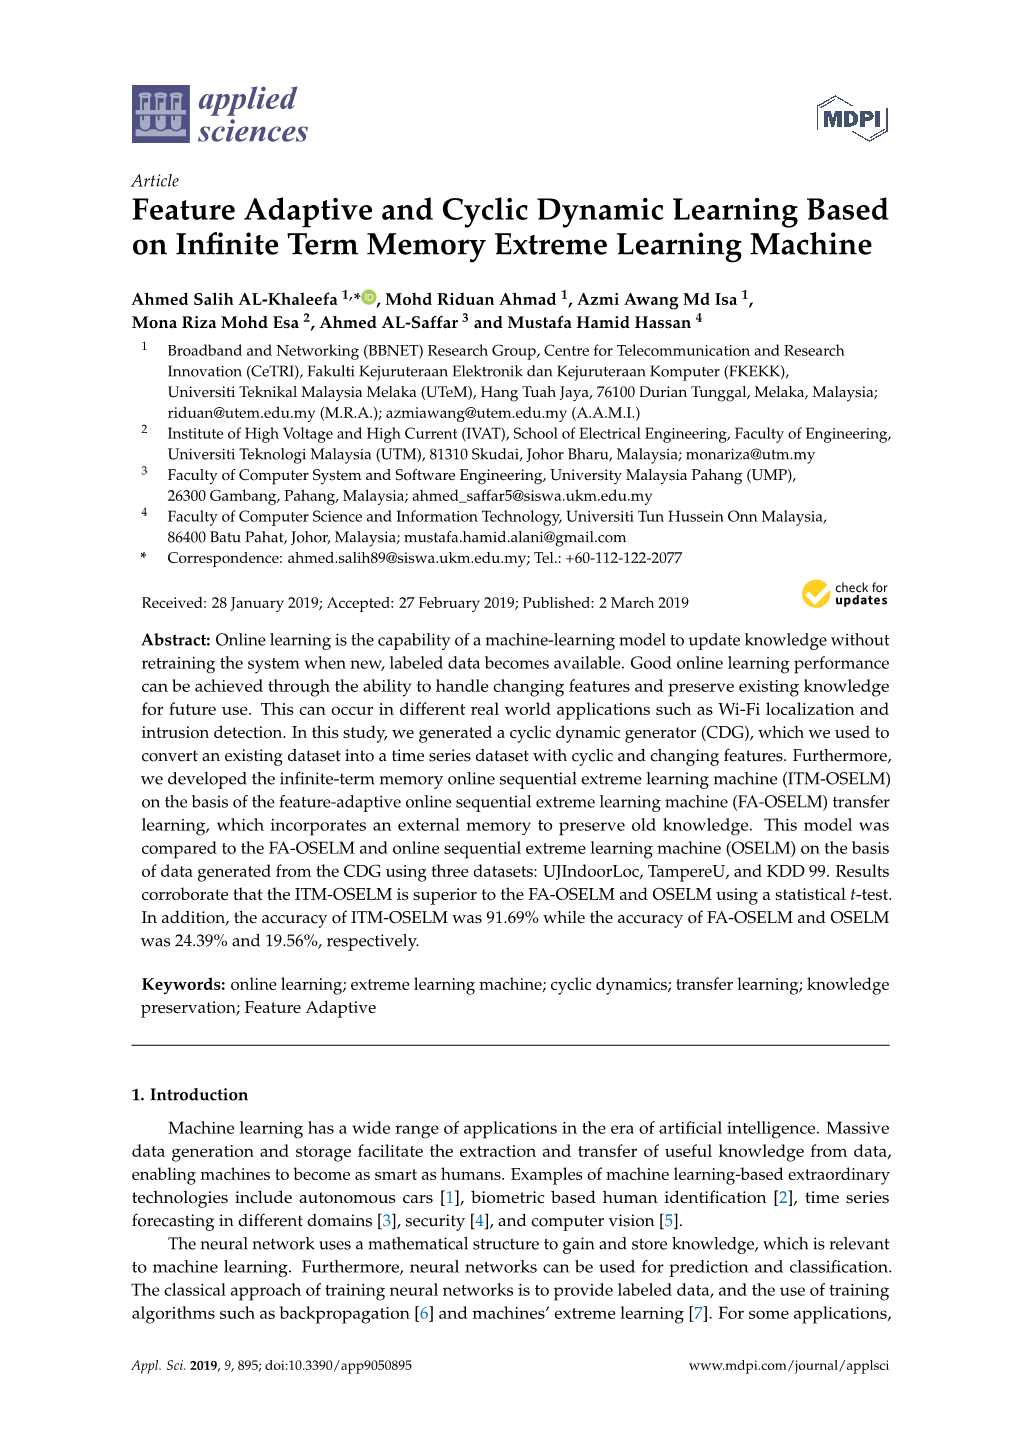 Feature Adaptive and Cyclic Dynamic Learning Based on Infinite Term